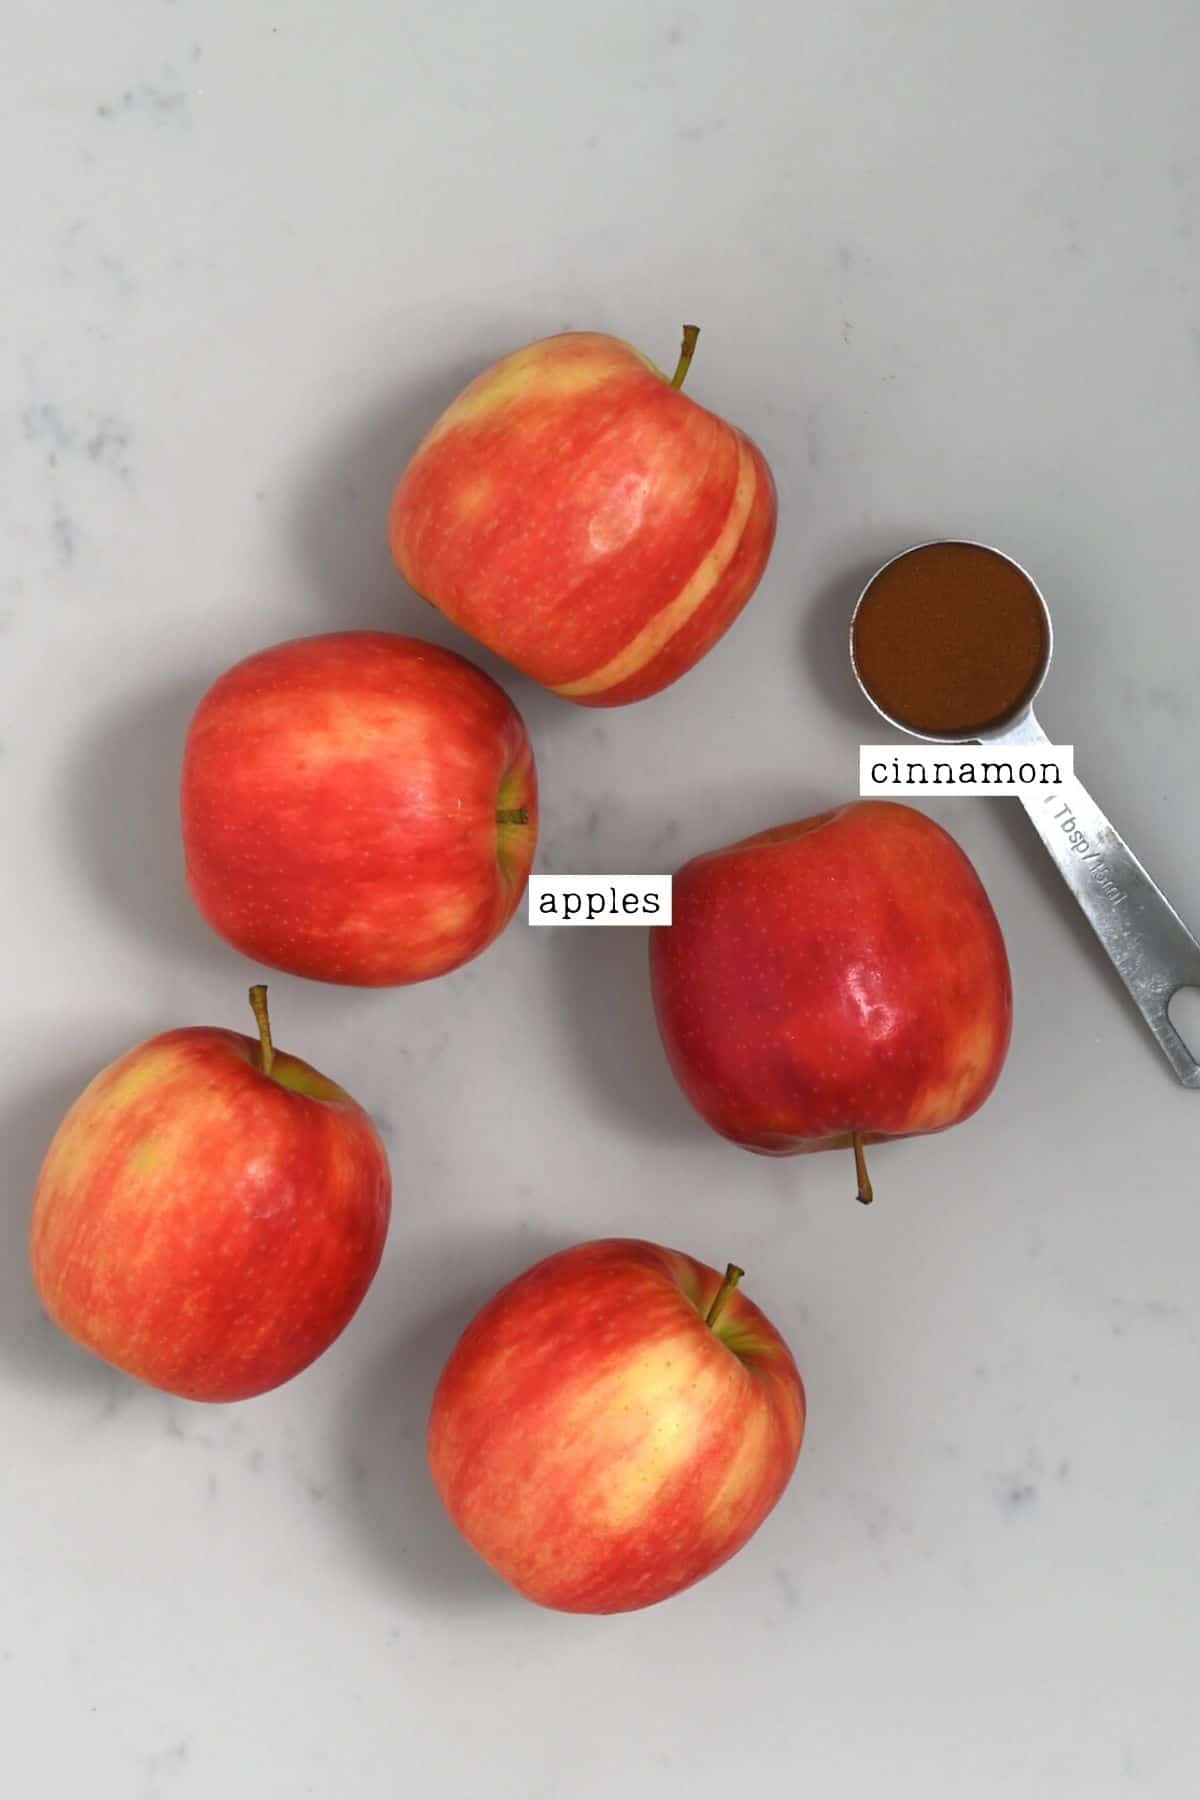 Ingredients for apple chips